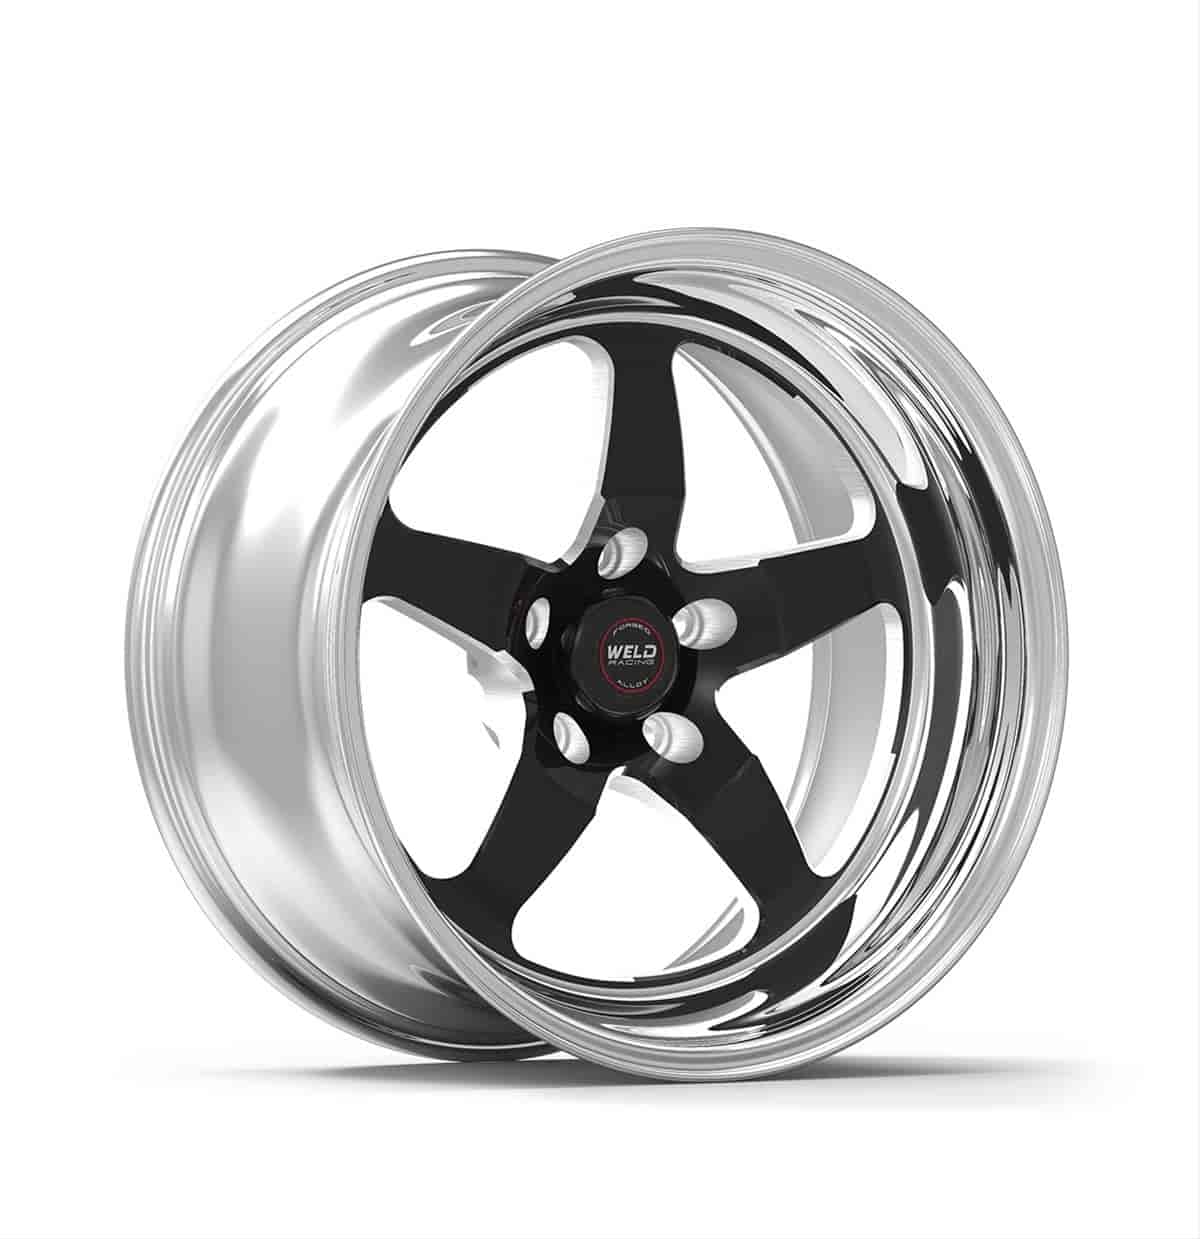 15X10.33 S71 Blk Ctr 5X4.75 4.5 -30mm O/S